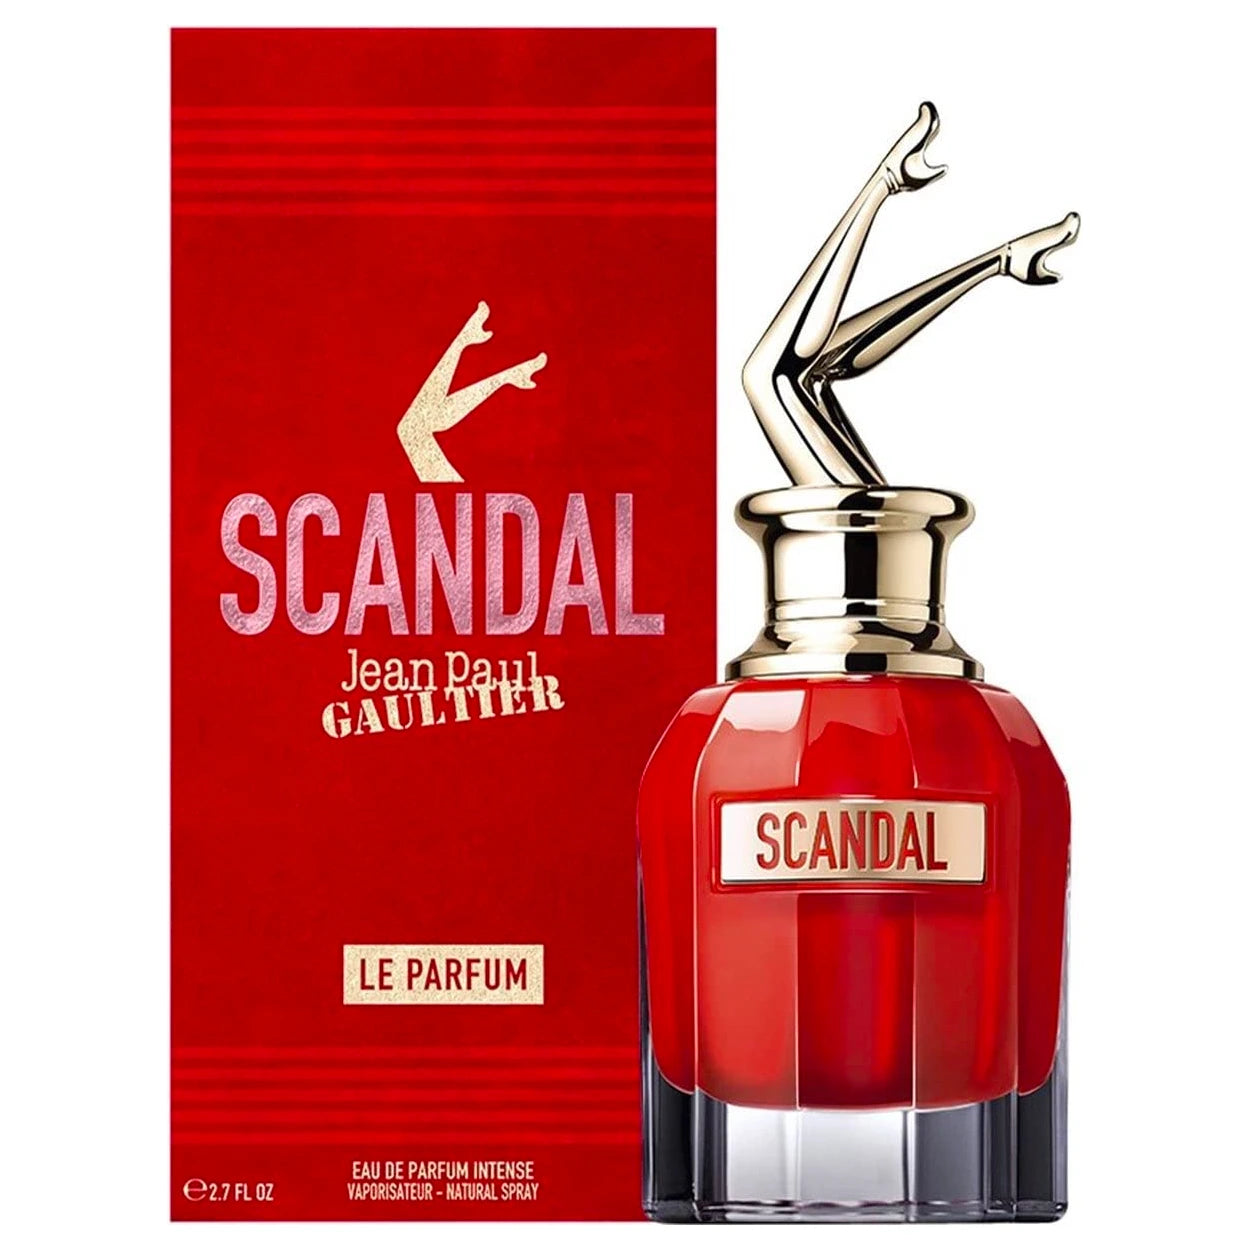 <p>Experience the exciting scent of Scandal Le Parfum Intense 2.7 oz EDP, a captivating Amber Floral fragrance developed by master perfumers Ane Ayo, Fabrice Pellegrin and Daphné Bugey. Featuring top notes of Jasmine, middle notes of Caramel and Salt, and base notes of Vanilla, it's sure to tantalize your senses and leave a lasting impression.</p>